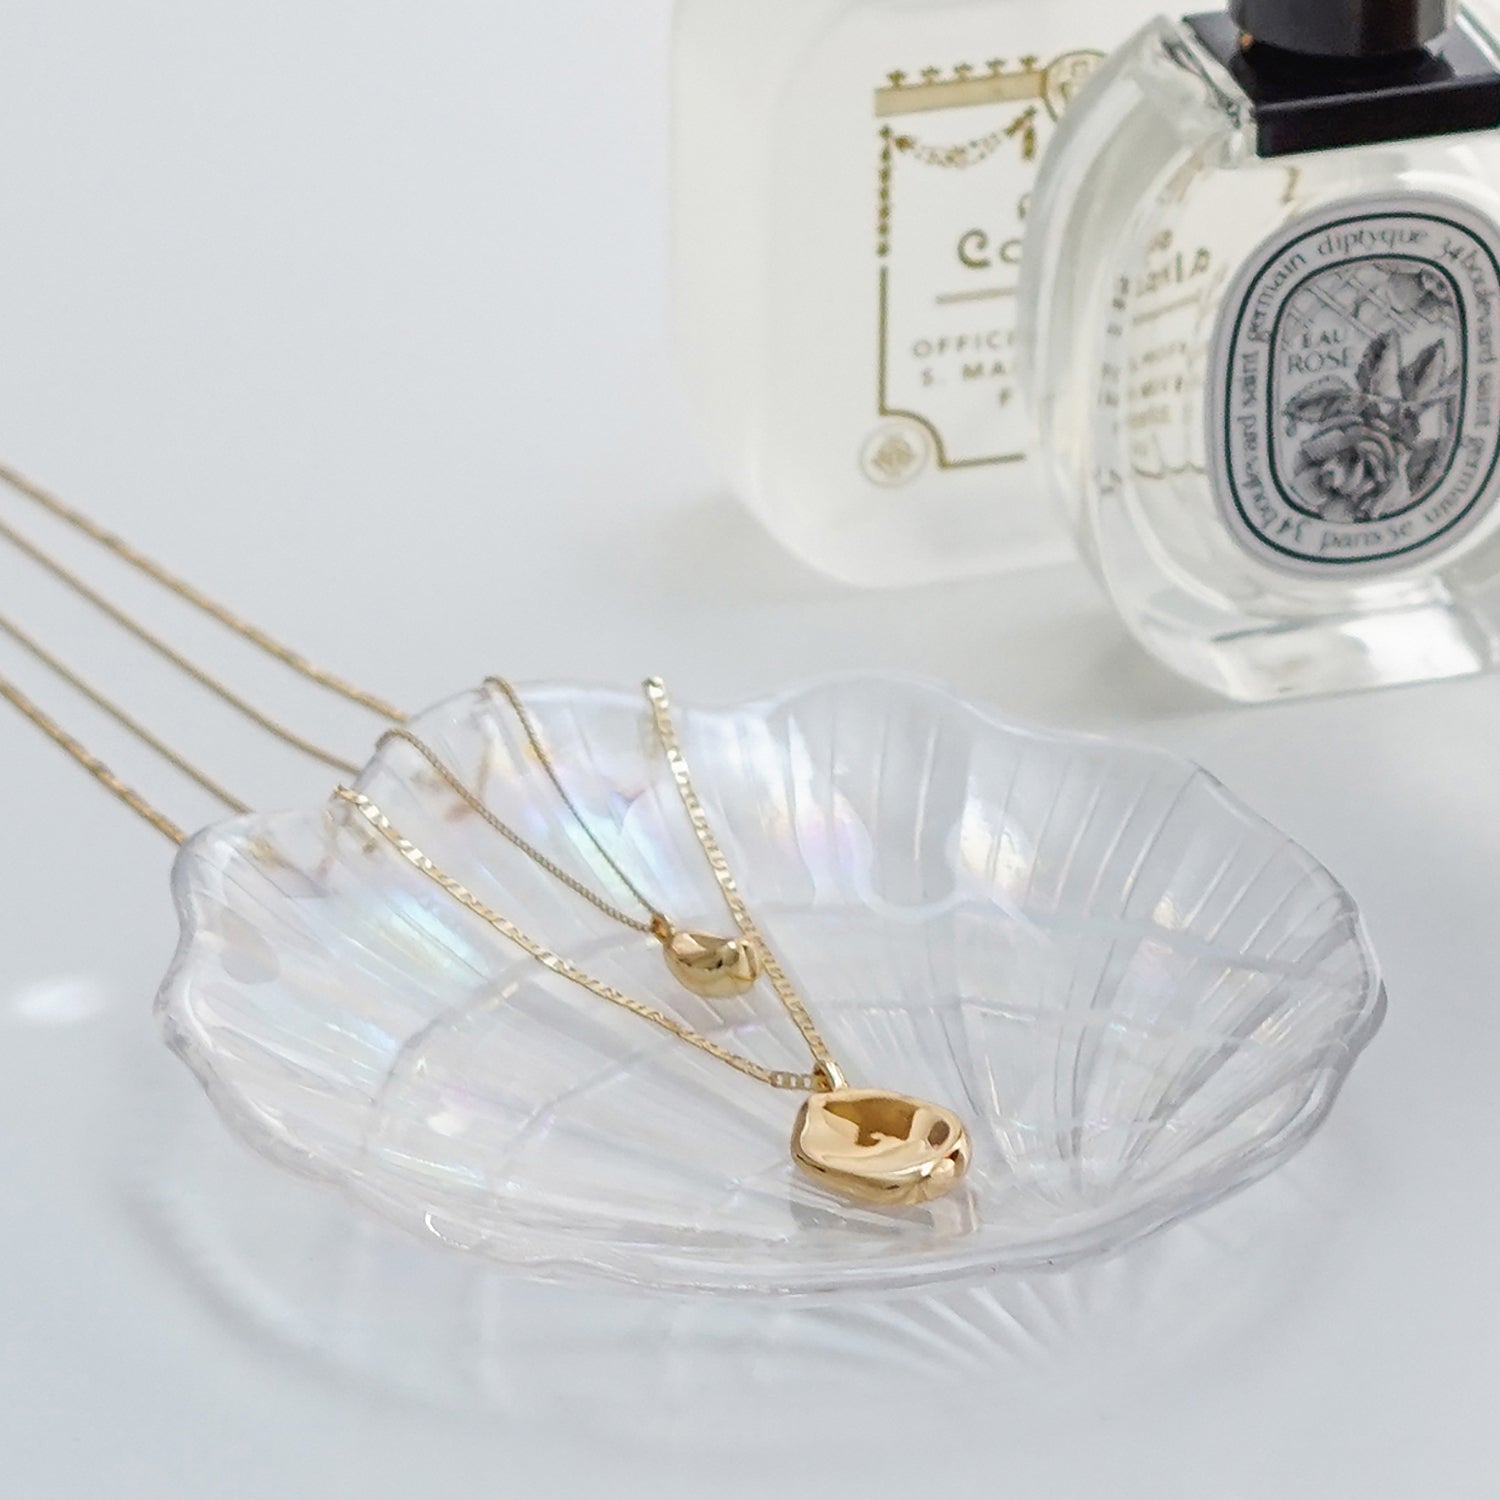 jenny bird gold round necklace on a holographic shell tray, diptyque rose perfume, and santa maria novella perfume